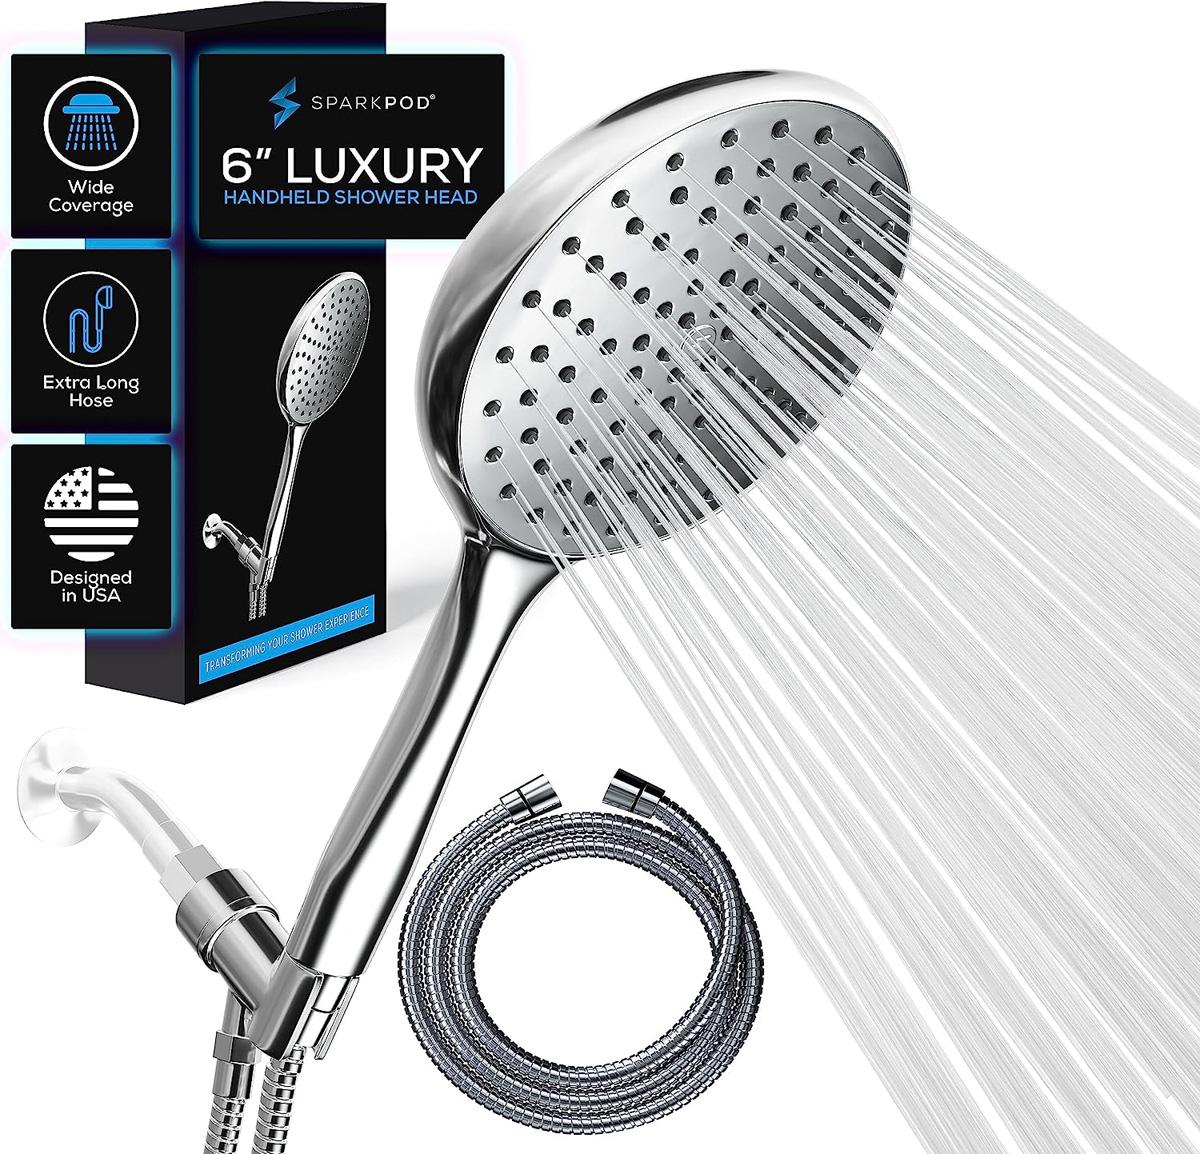 SparkPod High Pressure Handheld Shower Head with Hose for $13.48 Shipped